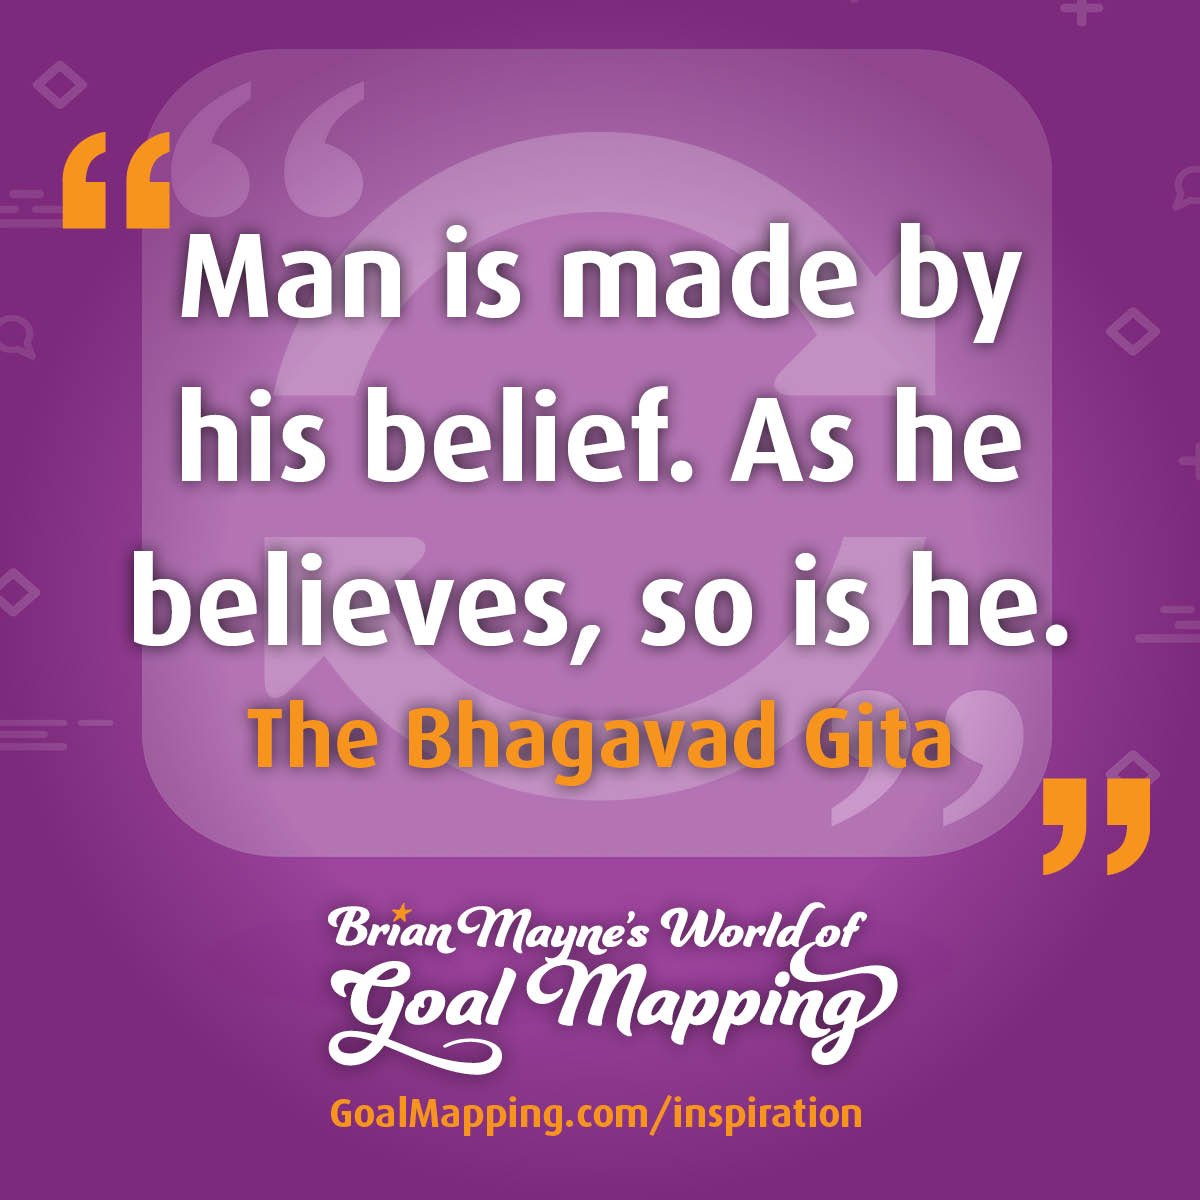 "Man is made by his belief. As he believes, so is he." The Bhagavad Gita